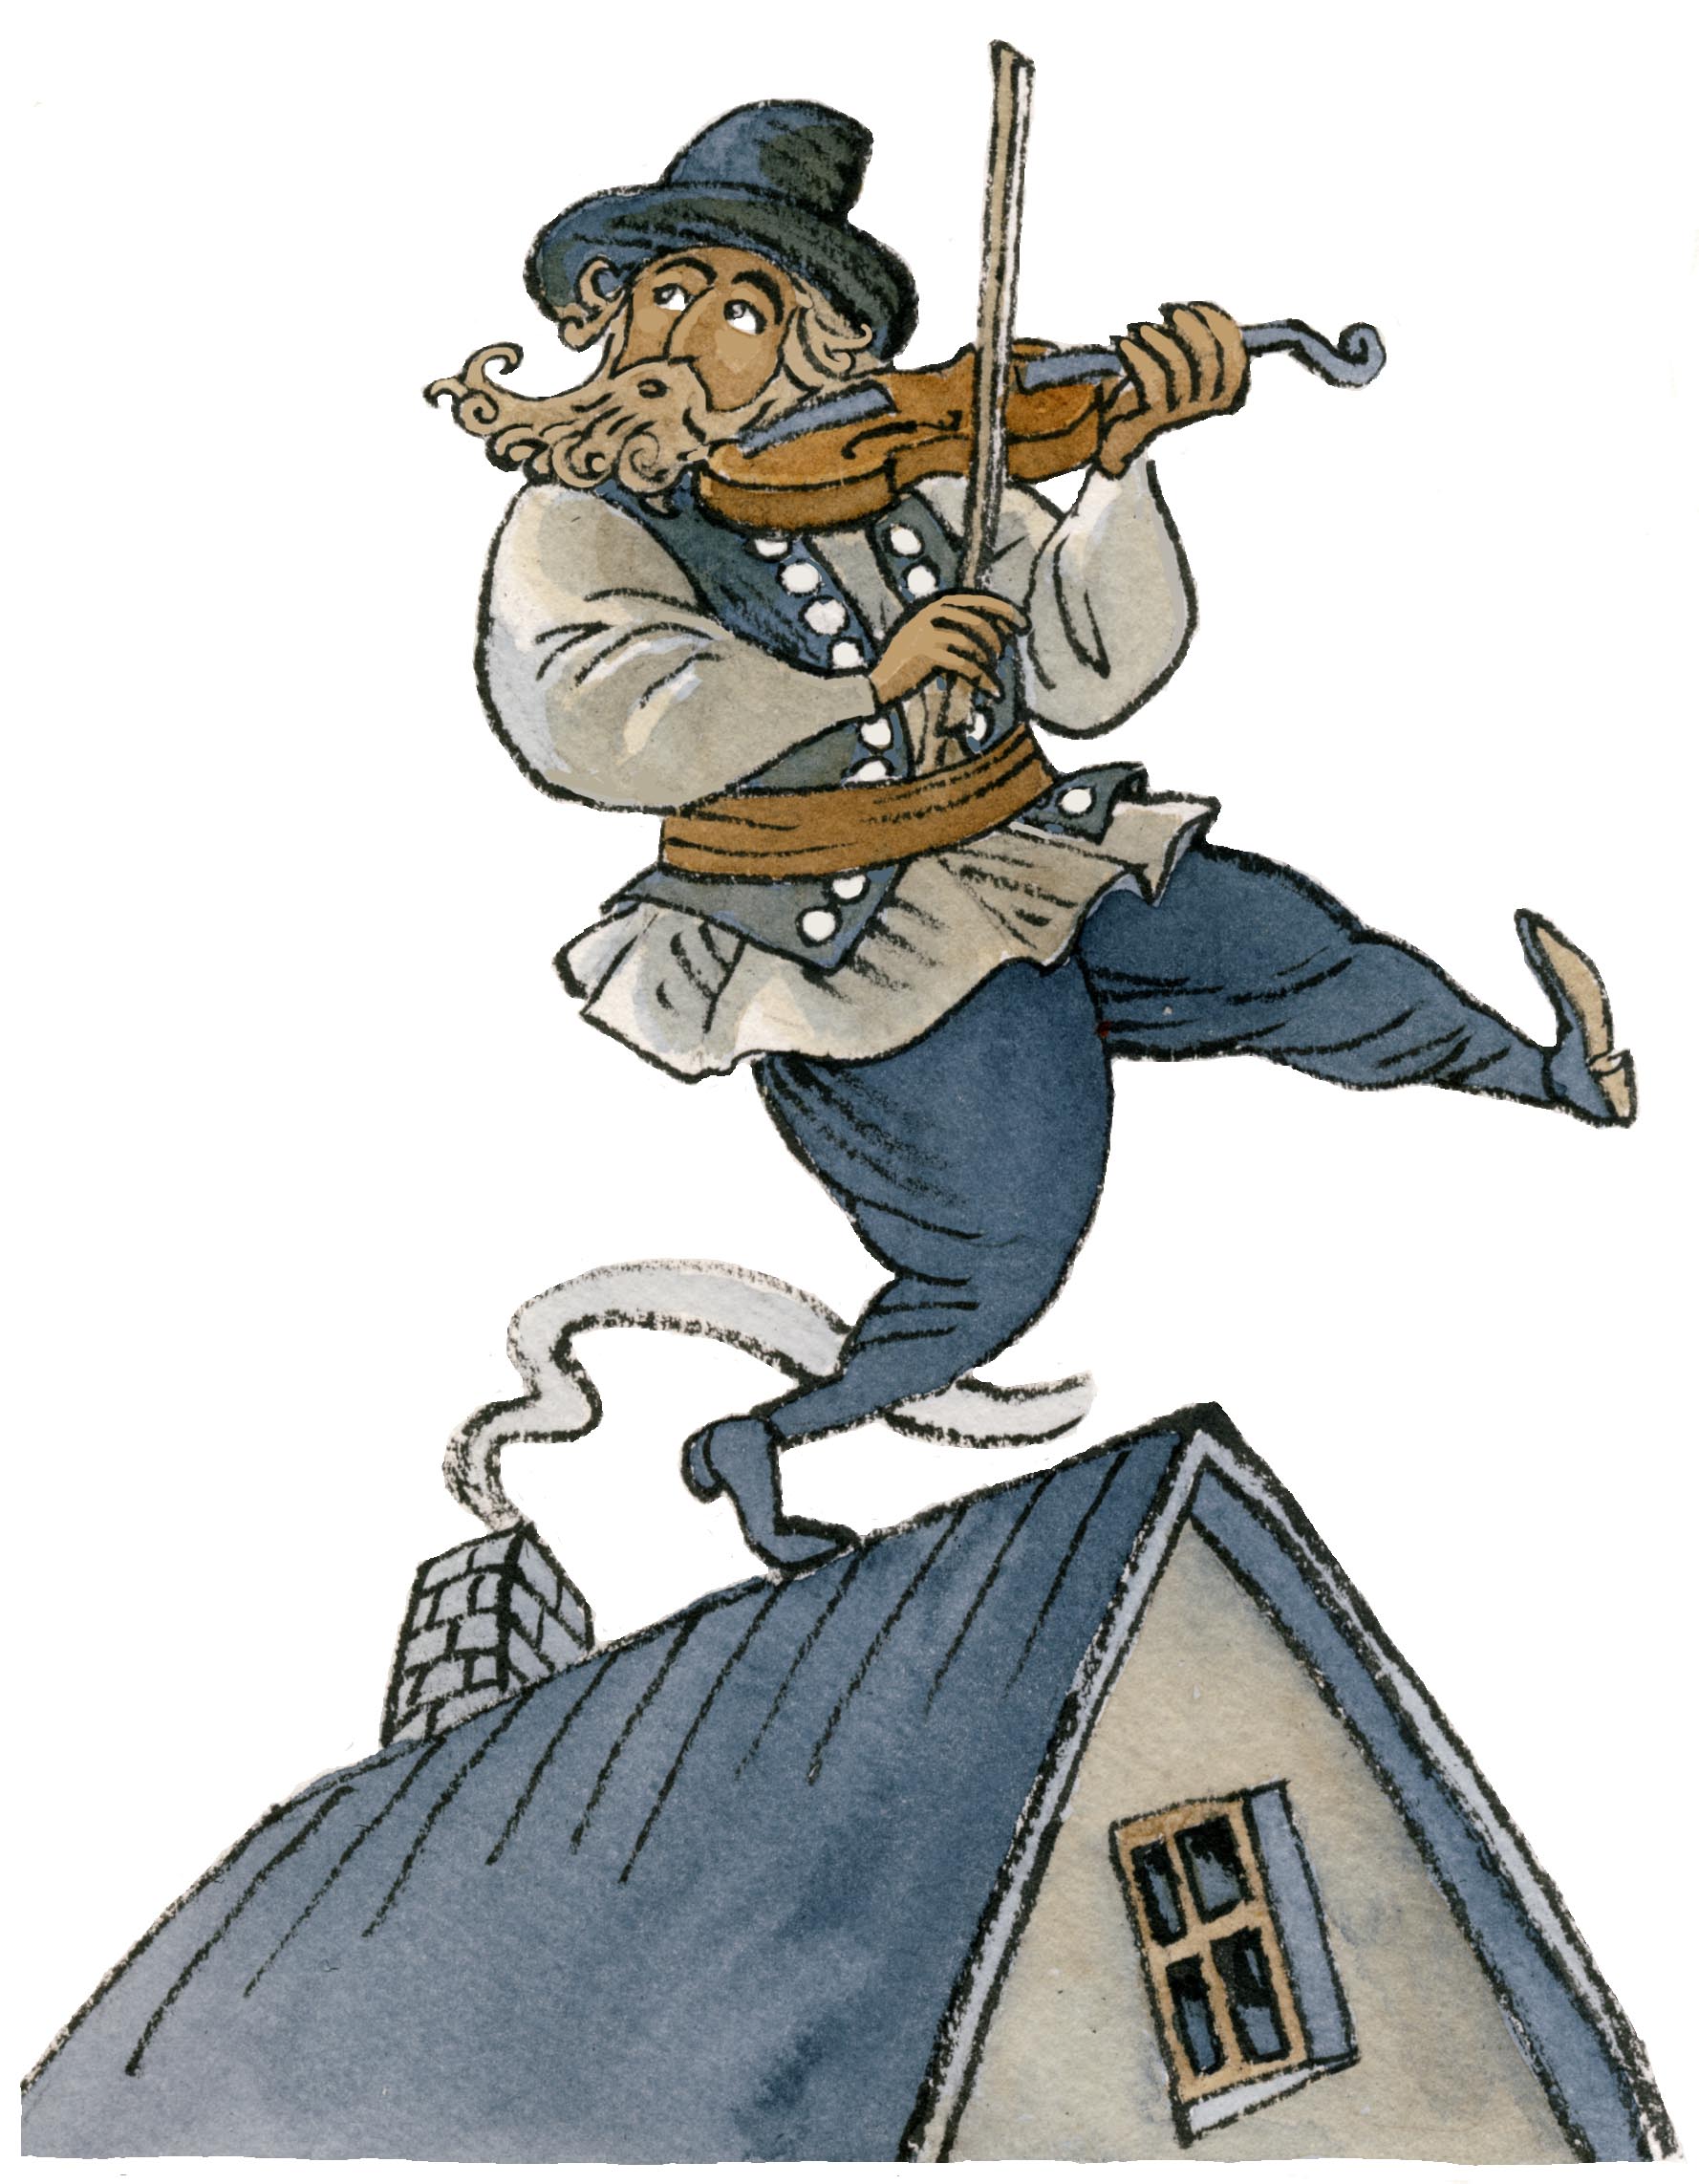 "Fiddler on the Roof" by Morburre | CC via Wikimedia Commons